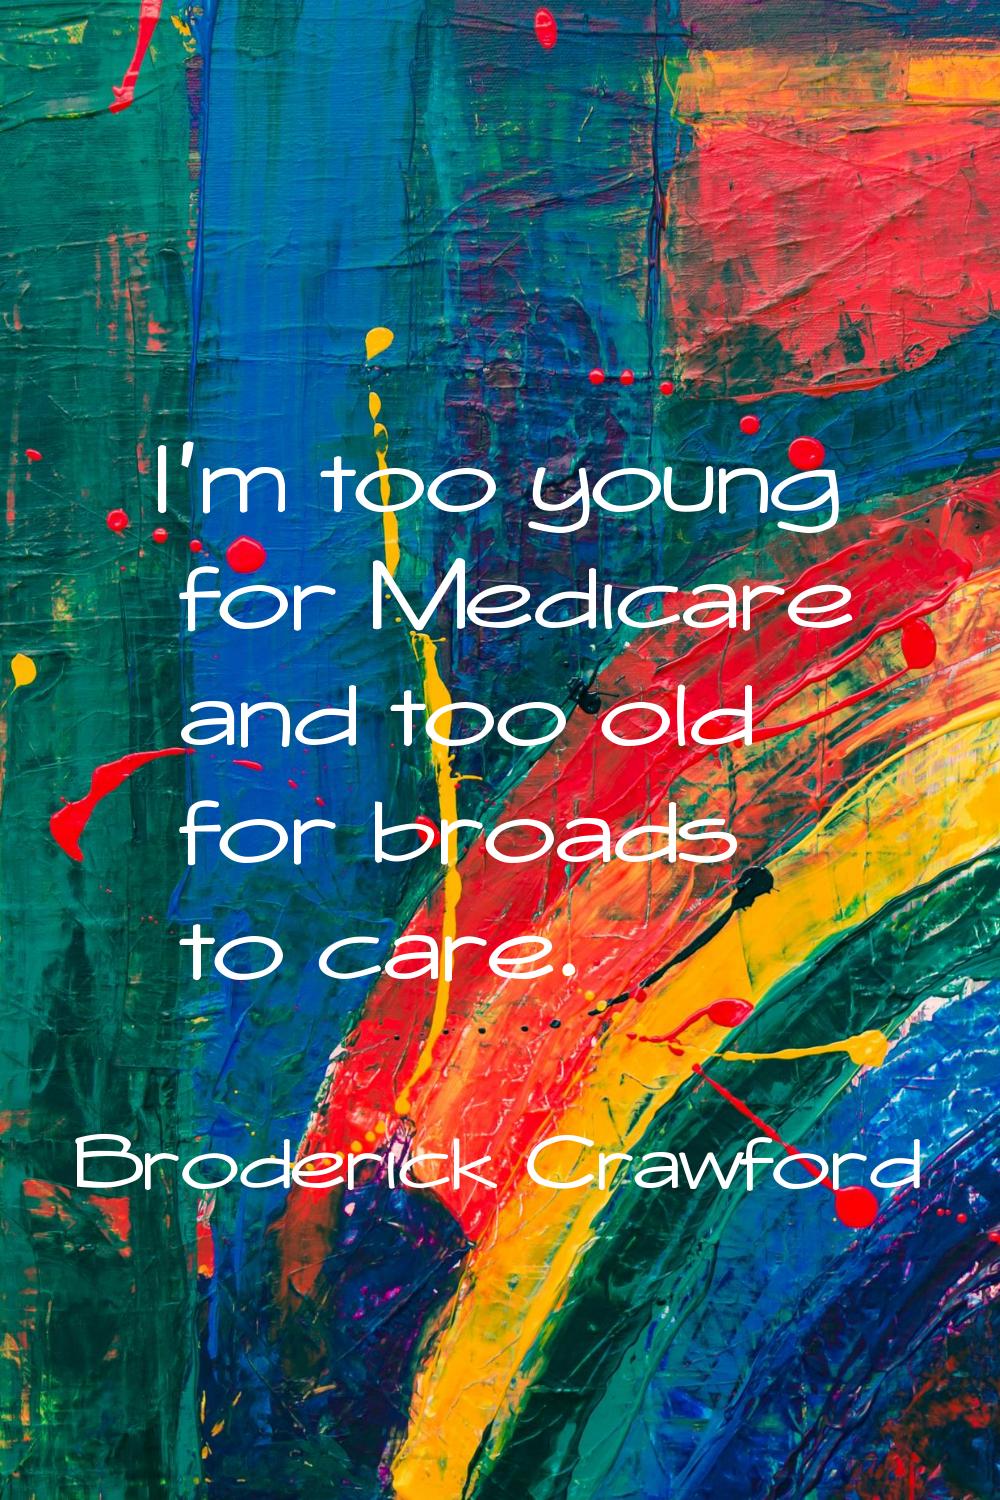 I'm too young for Medicare and too old for broads to care.